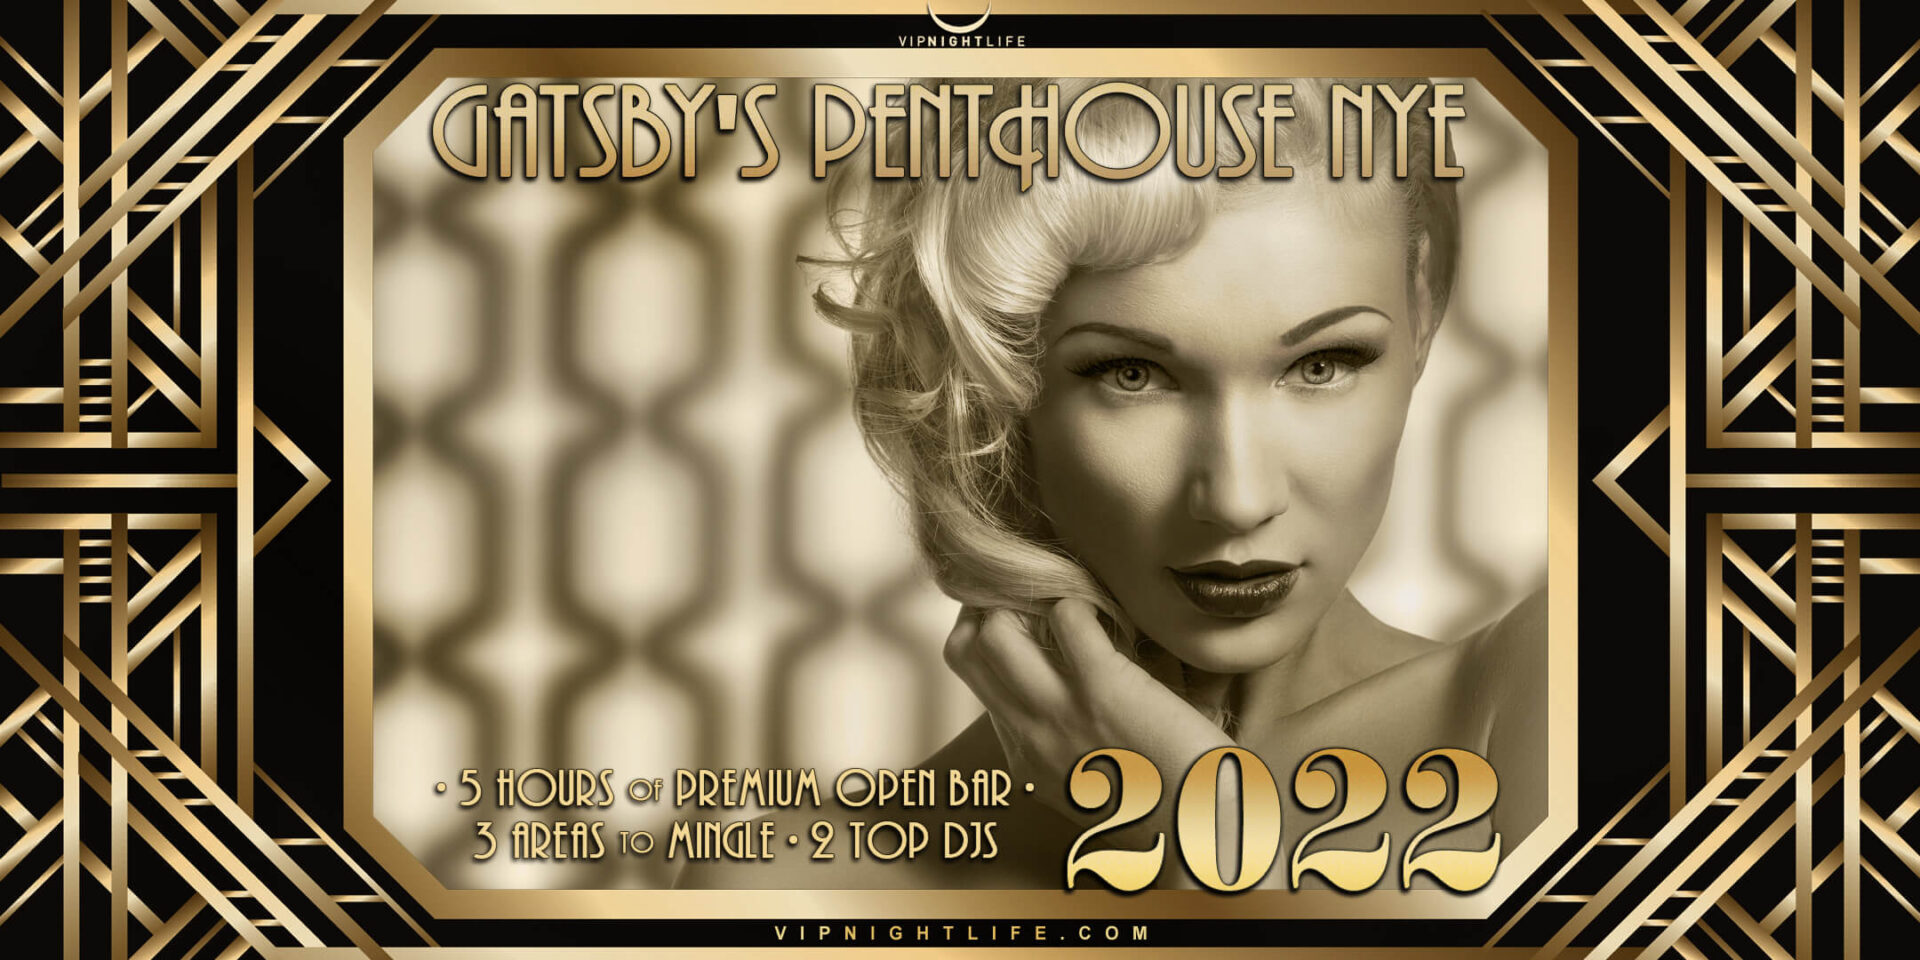 Los Angeles New Year's Eve Party 2022 Gatsby's Penthouse VIP Nightlife